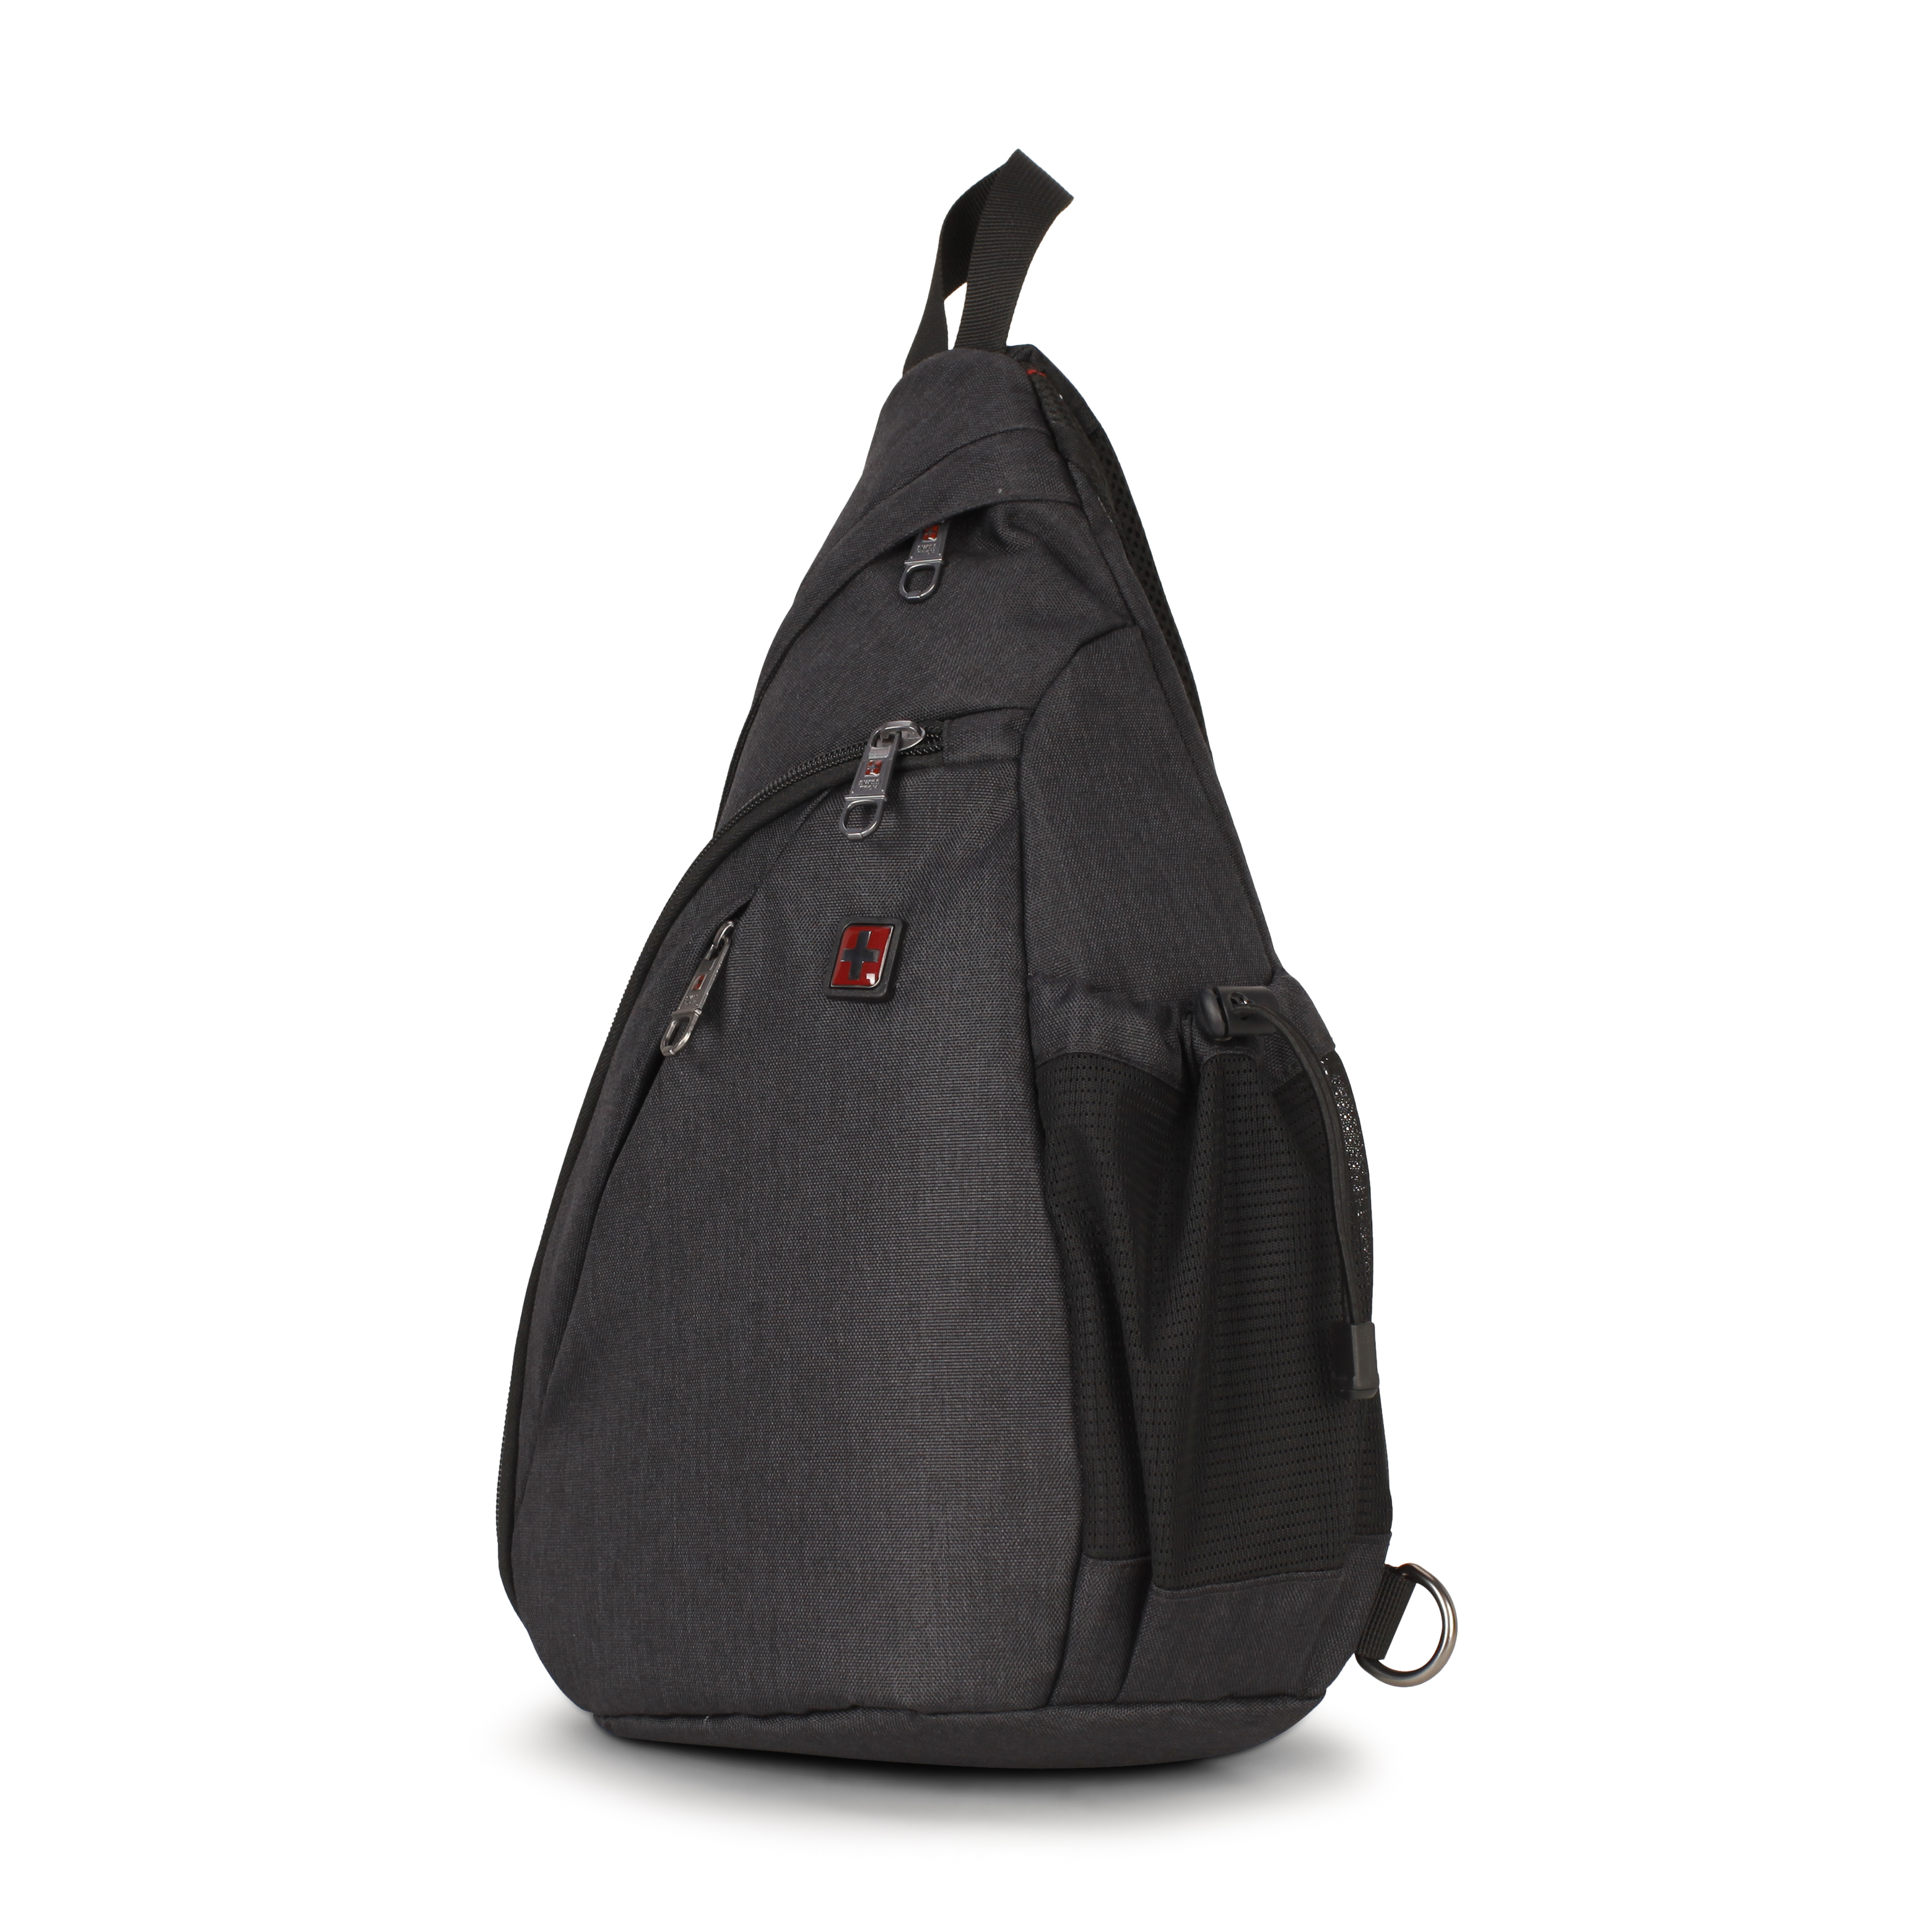 SwissTech Travel Sling Backpack, Black (All Ages) (Walmart Exclusive) - image 1 of 10